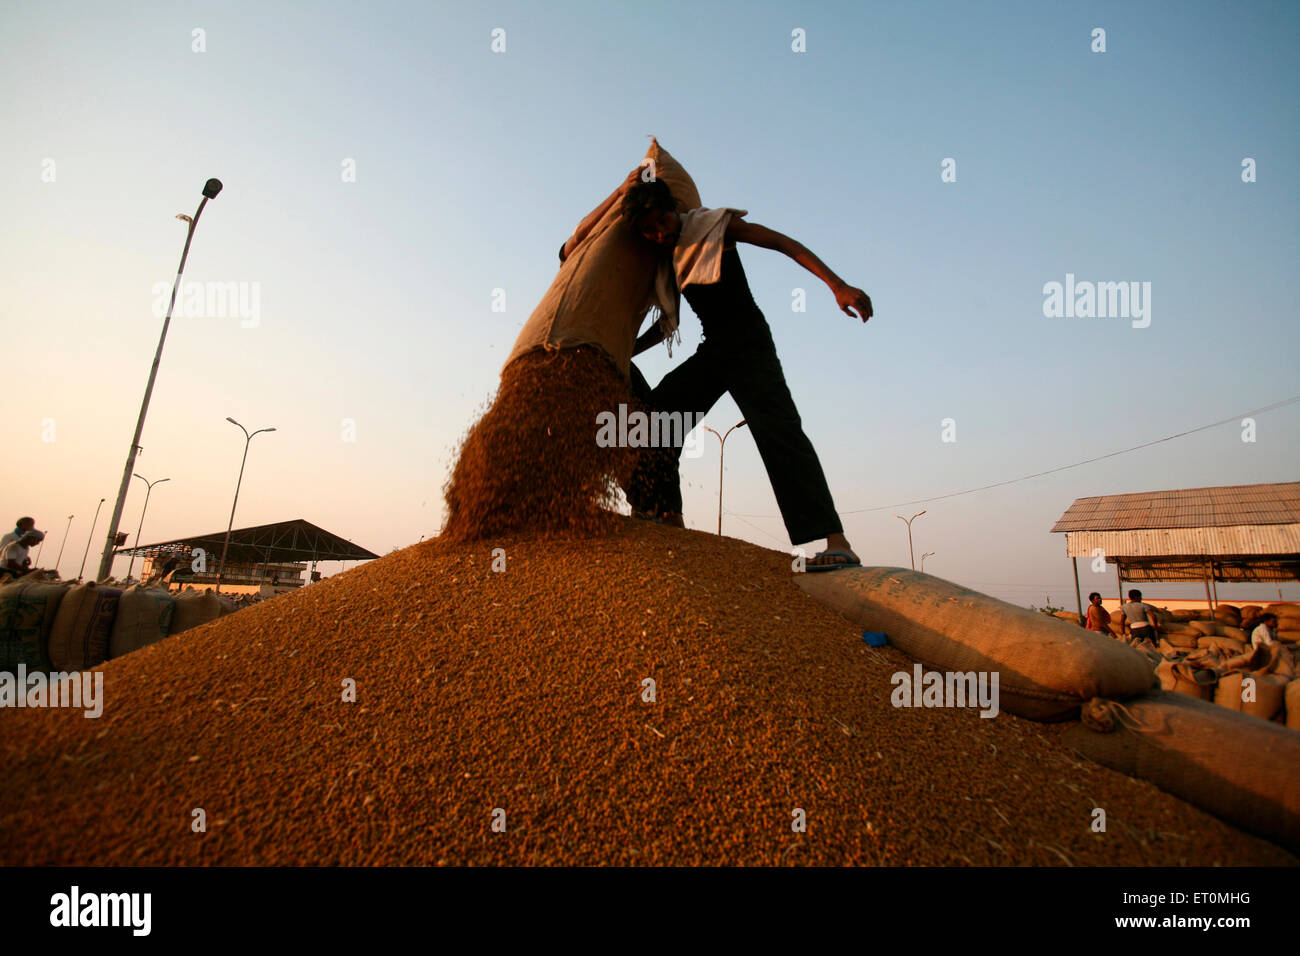 Workers emptying wheat from jute bag at Harsud Mandi ; food grains market in Bhopal ; Madhya Pradesh ; India Stock Photo